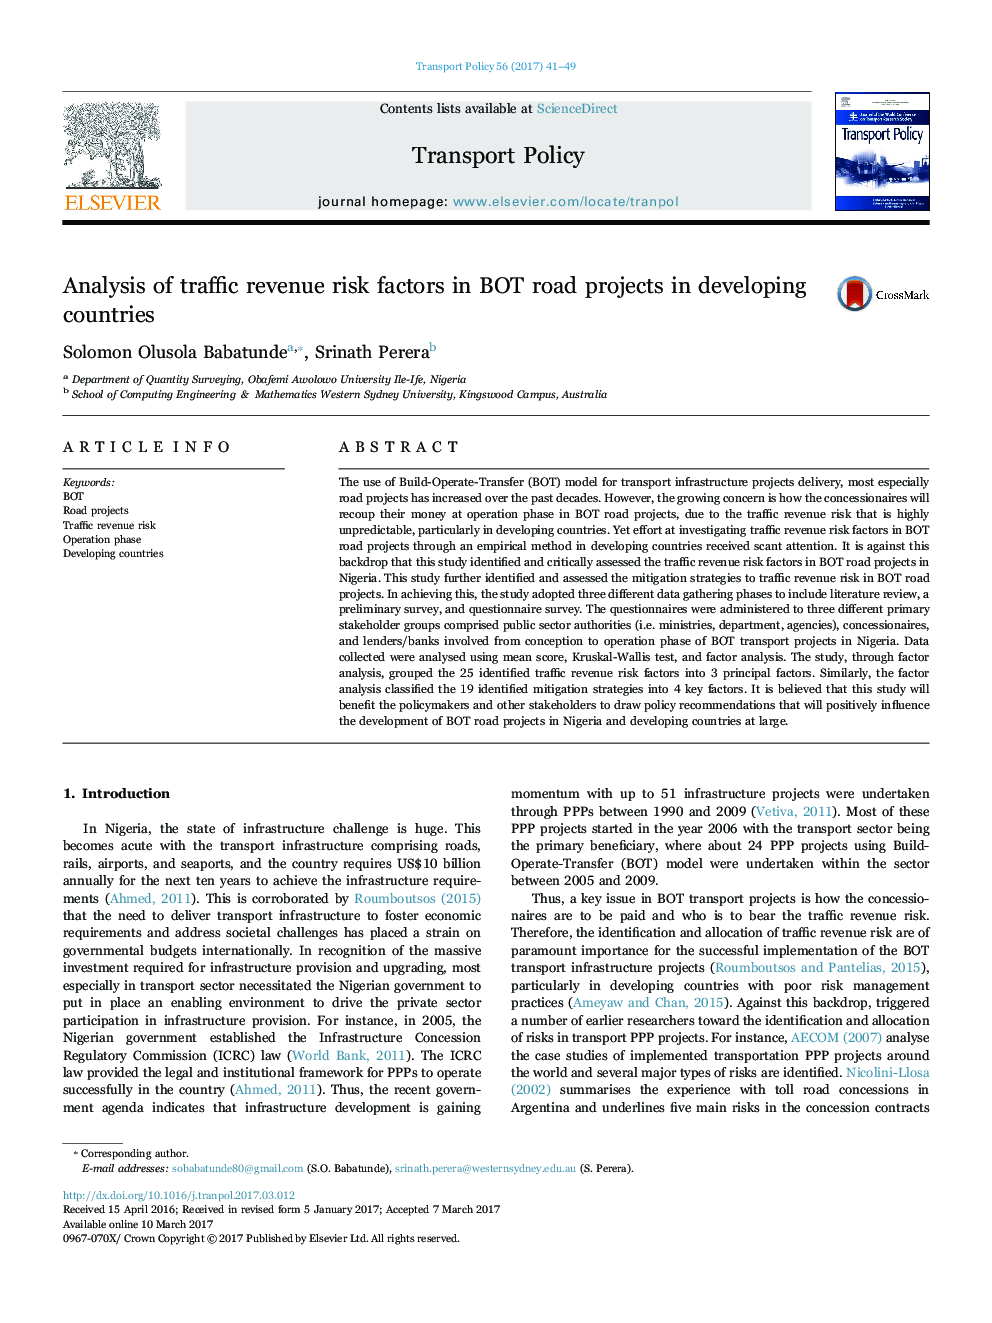 Analysis of traffic revenue risk factors in BOT road projects in developing countries